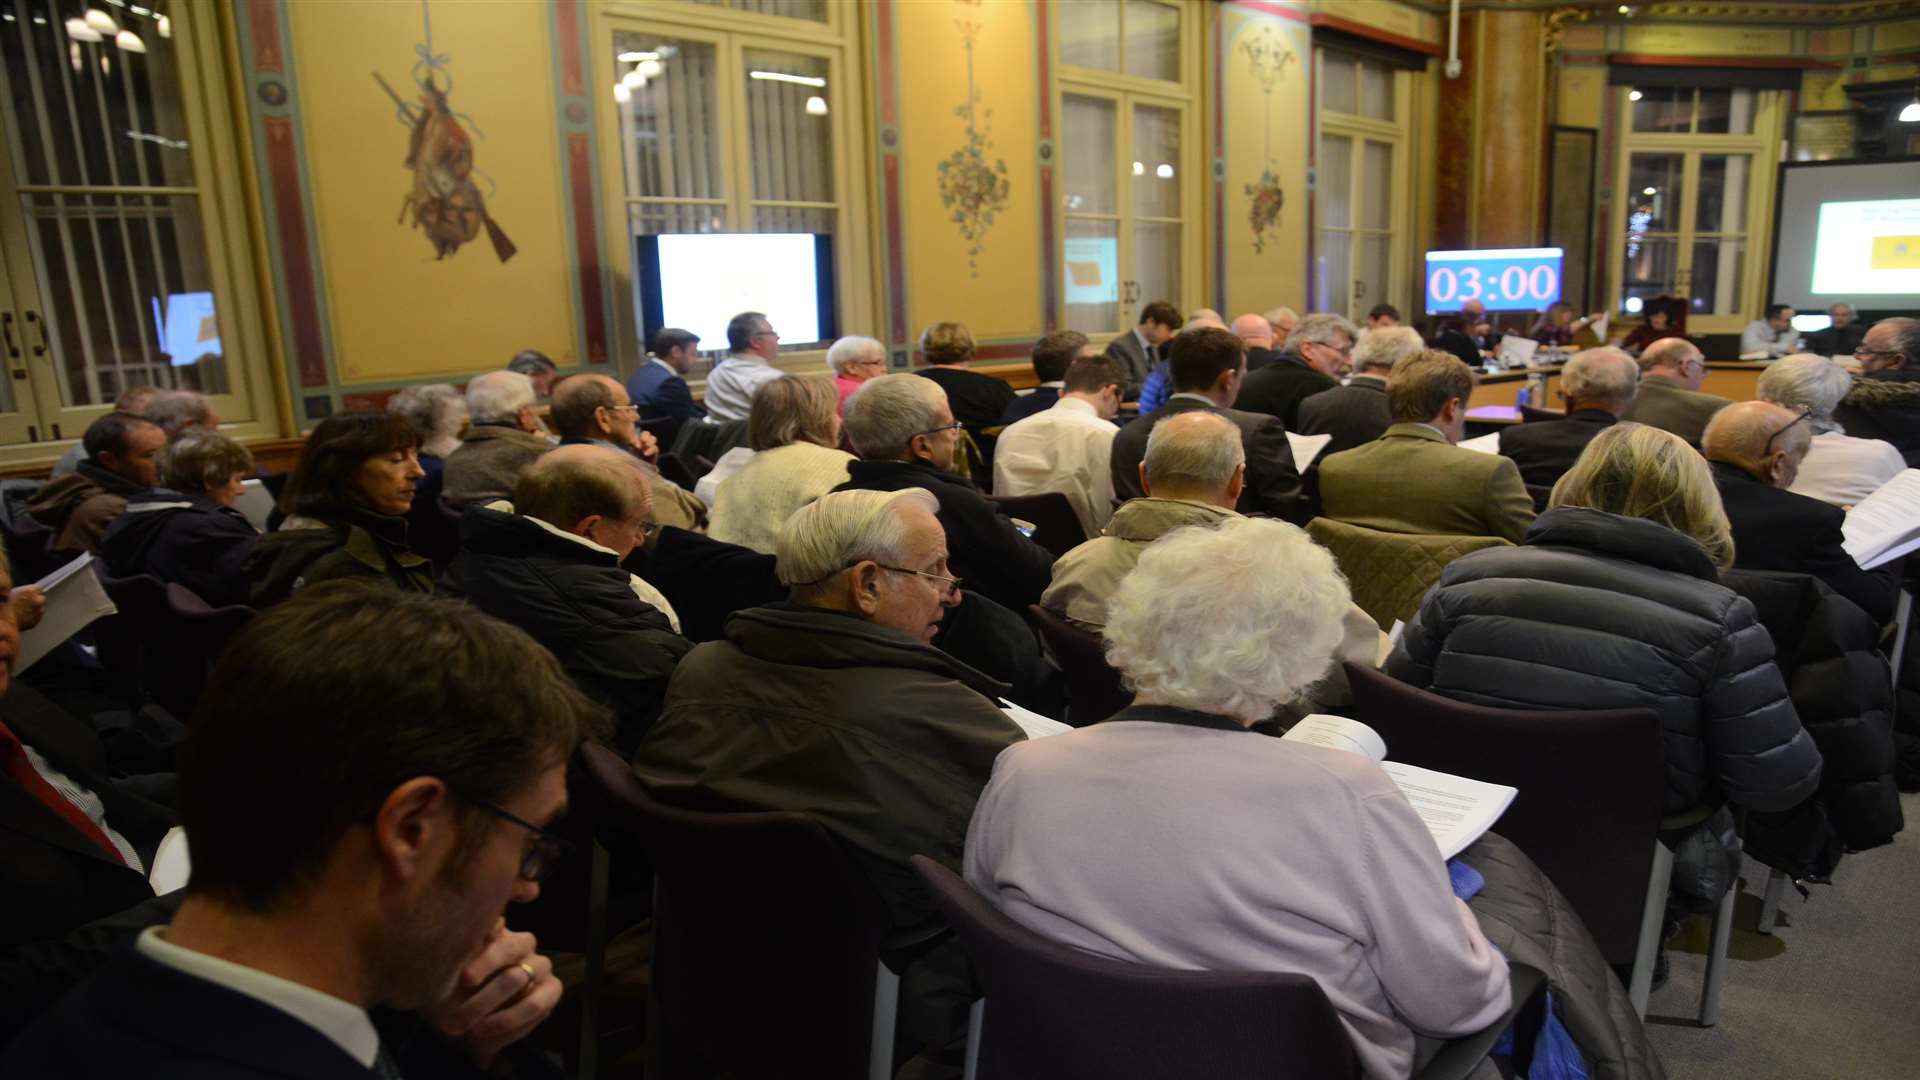 The audience at Thursday's planning meeting